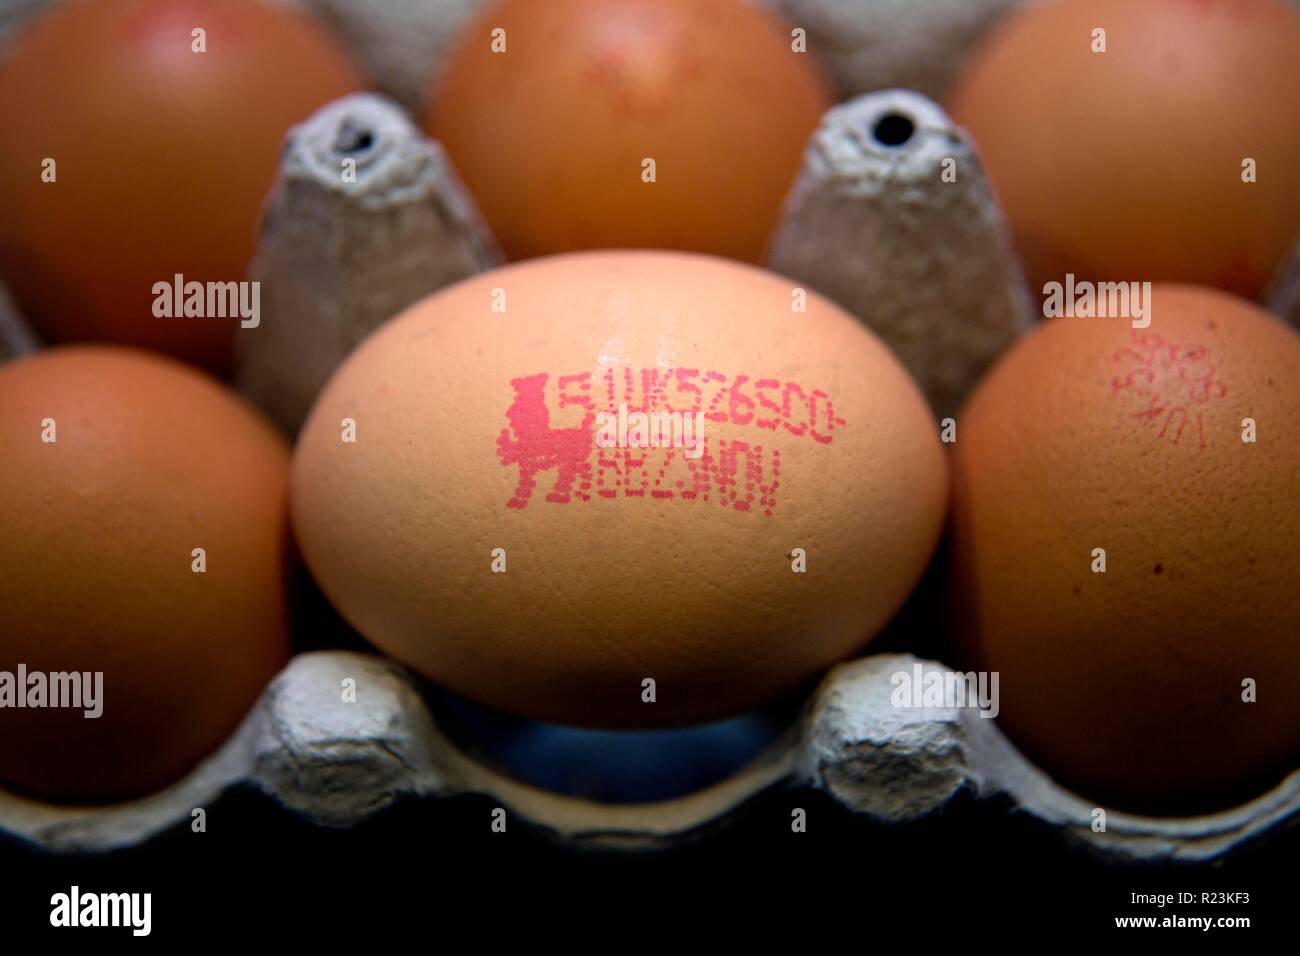 Egg stamped with British Lion mark guaranteeing quality Stock Photo